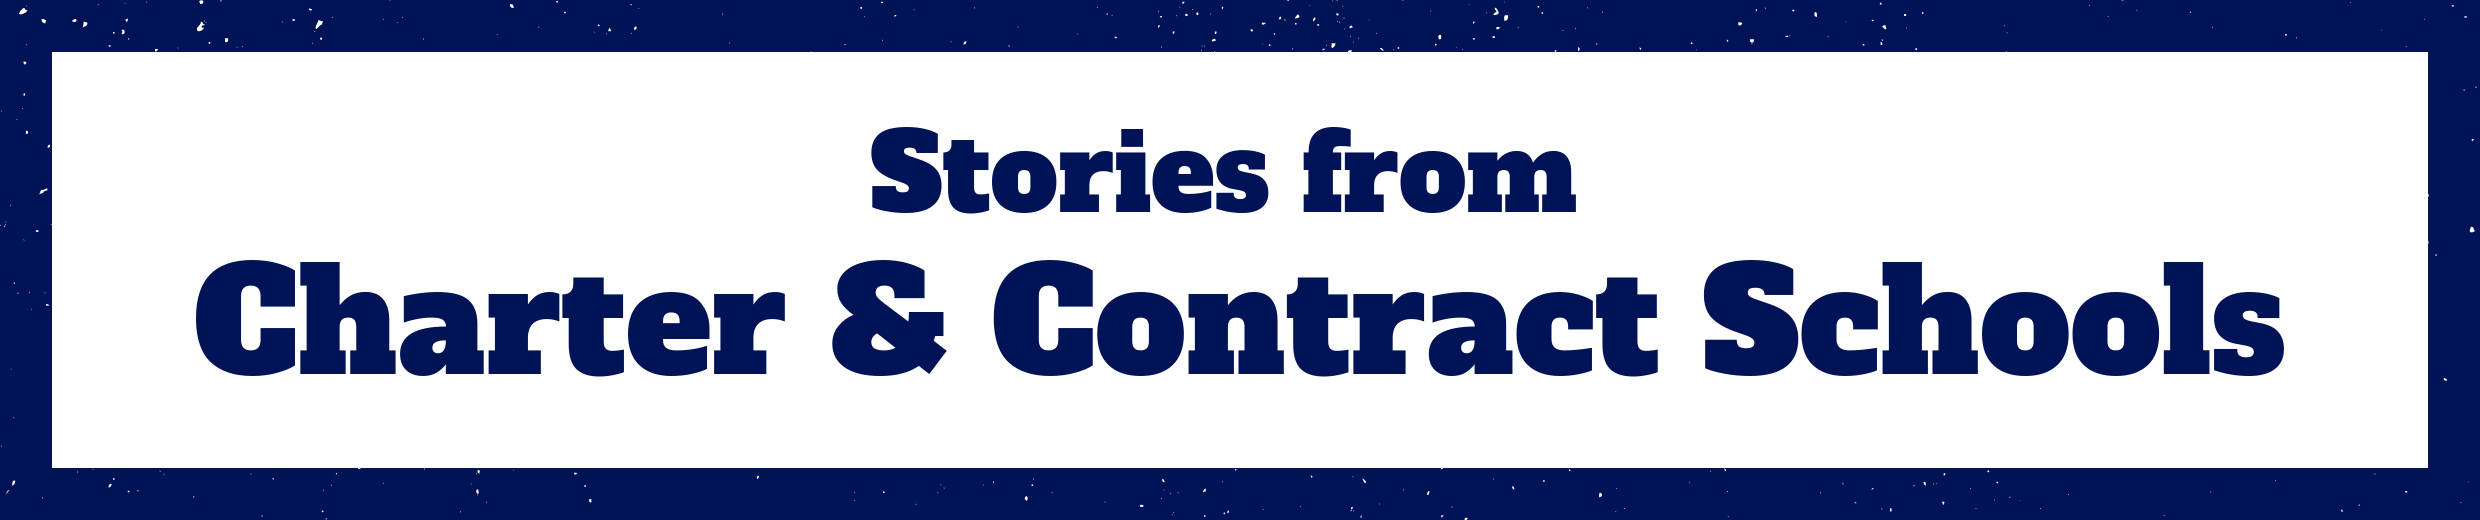 Stories from Charter & Contract Schools